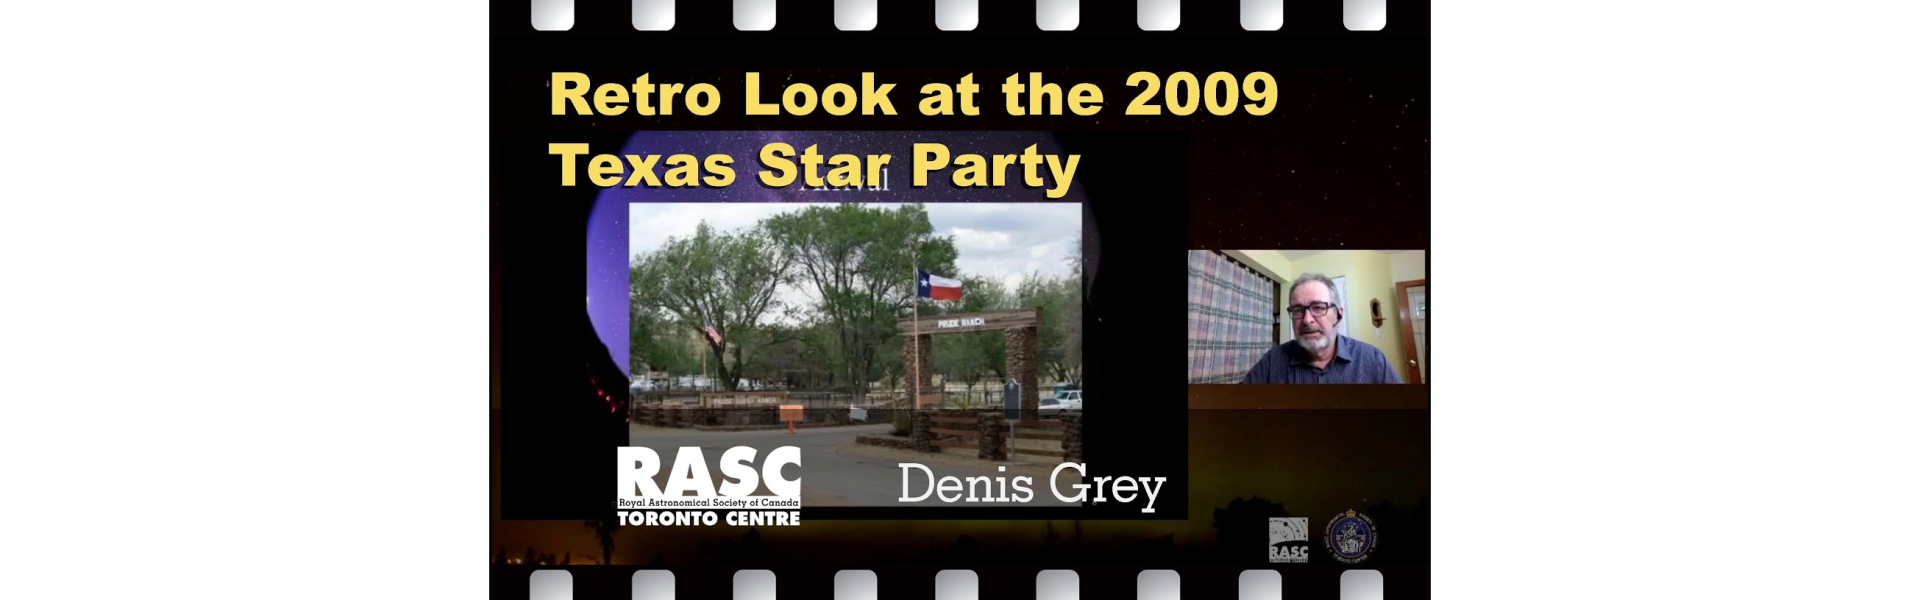 Retro Look at the 2009 Texas Star Party